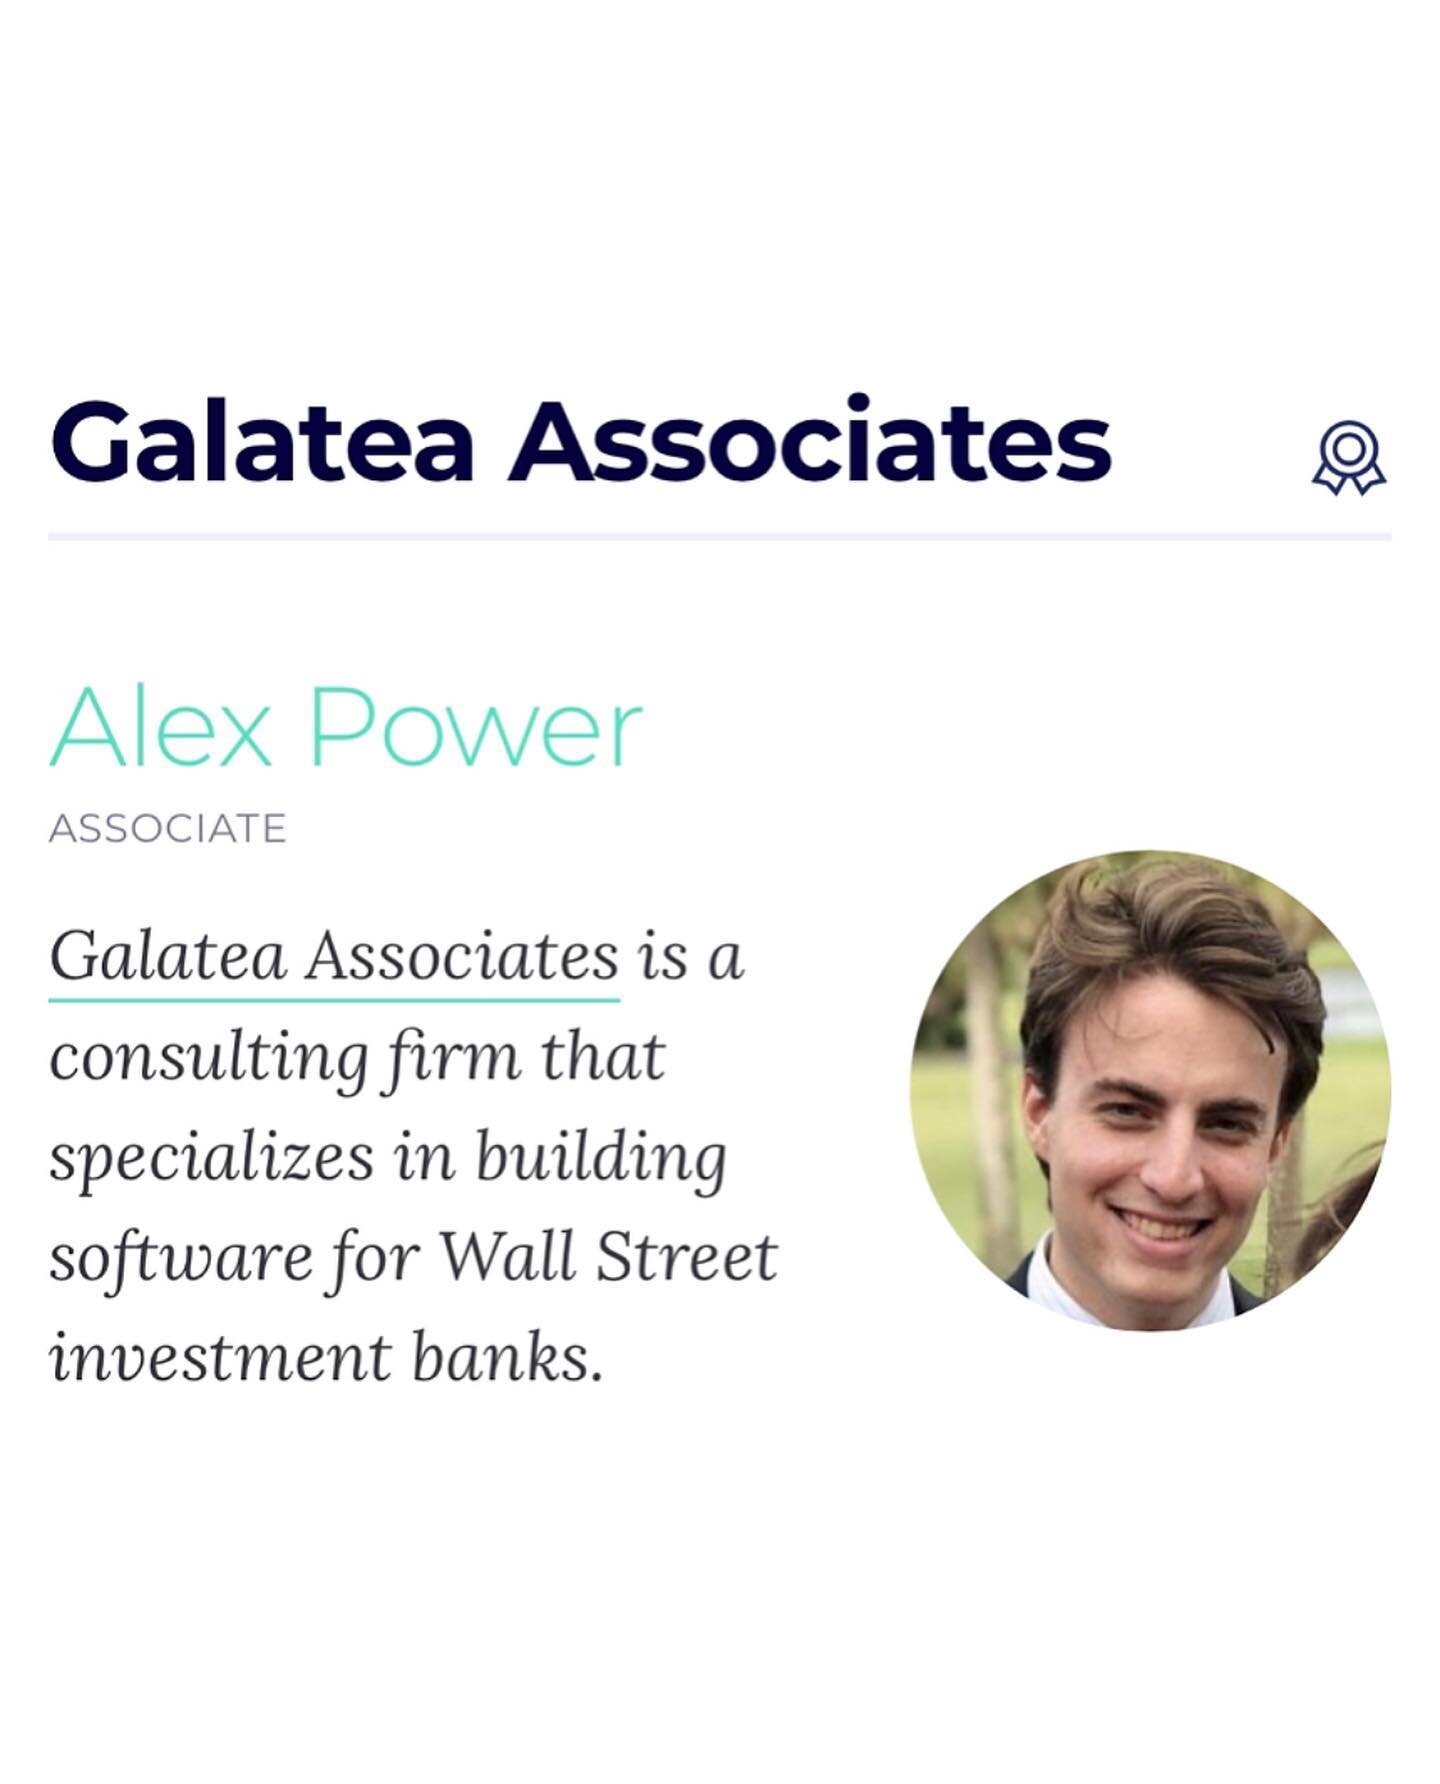 One of our Galateans, Alex Power, is featured in a new @builtinboston article discussing his career growth, transition into management, and advice he would give to aspiring managers. Check it out!!

https://www.builtinboston.com/2023/03/29/how-indivi